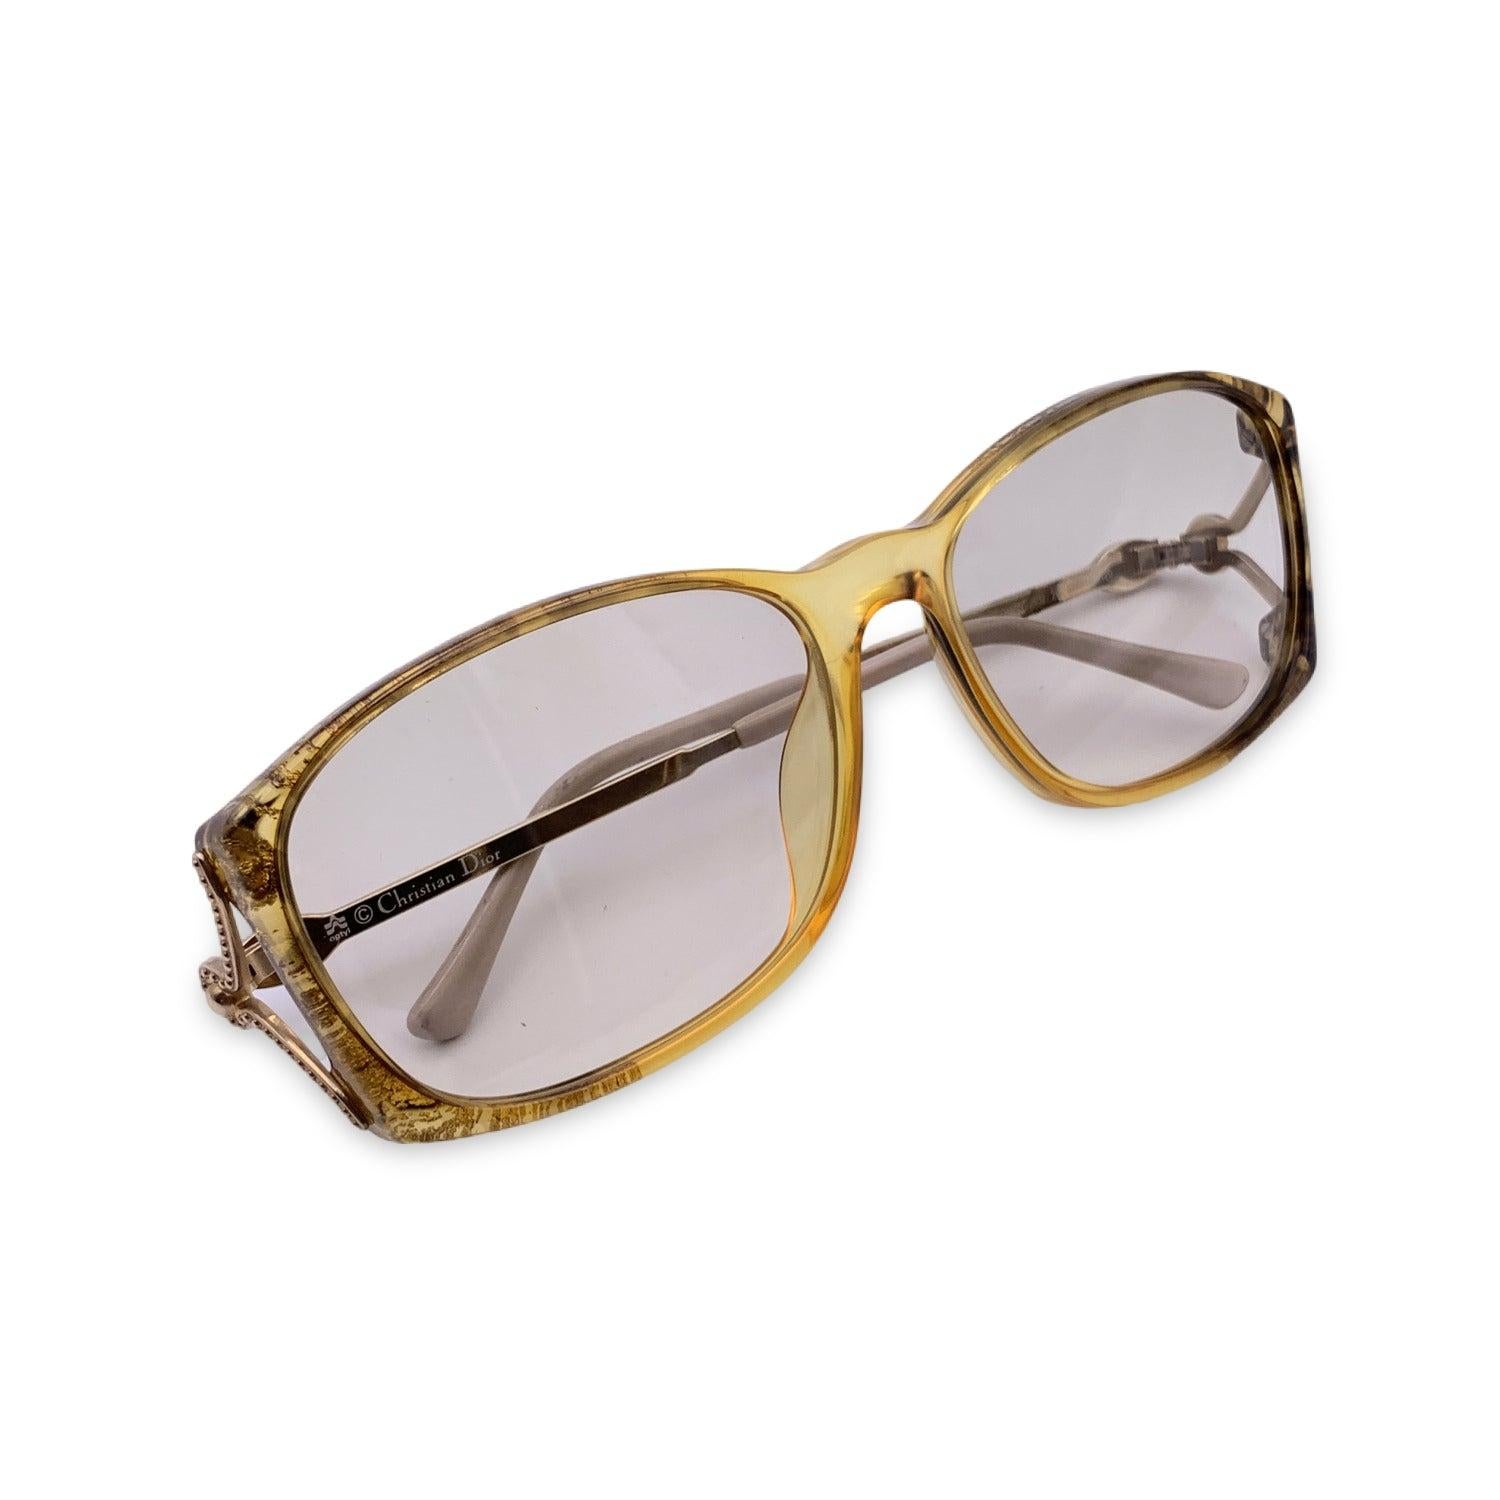 Vintage Christian Dior Women Sunglasses, Mod. 22632 20 Opty. Size: 57/16 120mm. Transparent beige acetate frame, with a metal golden effect on the sides. Gold dots effect on temples with a white finish. Gold CD logo con temples . 100% Total UVA/UVB